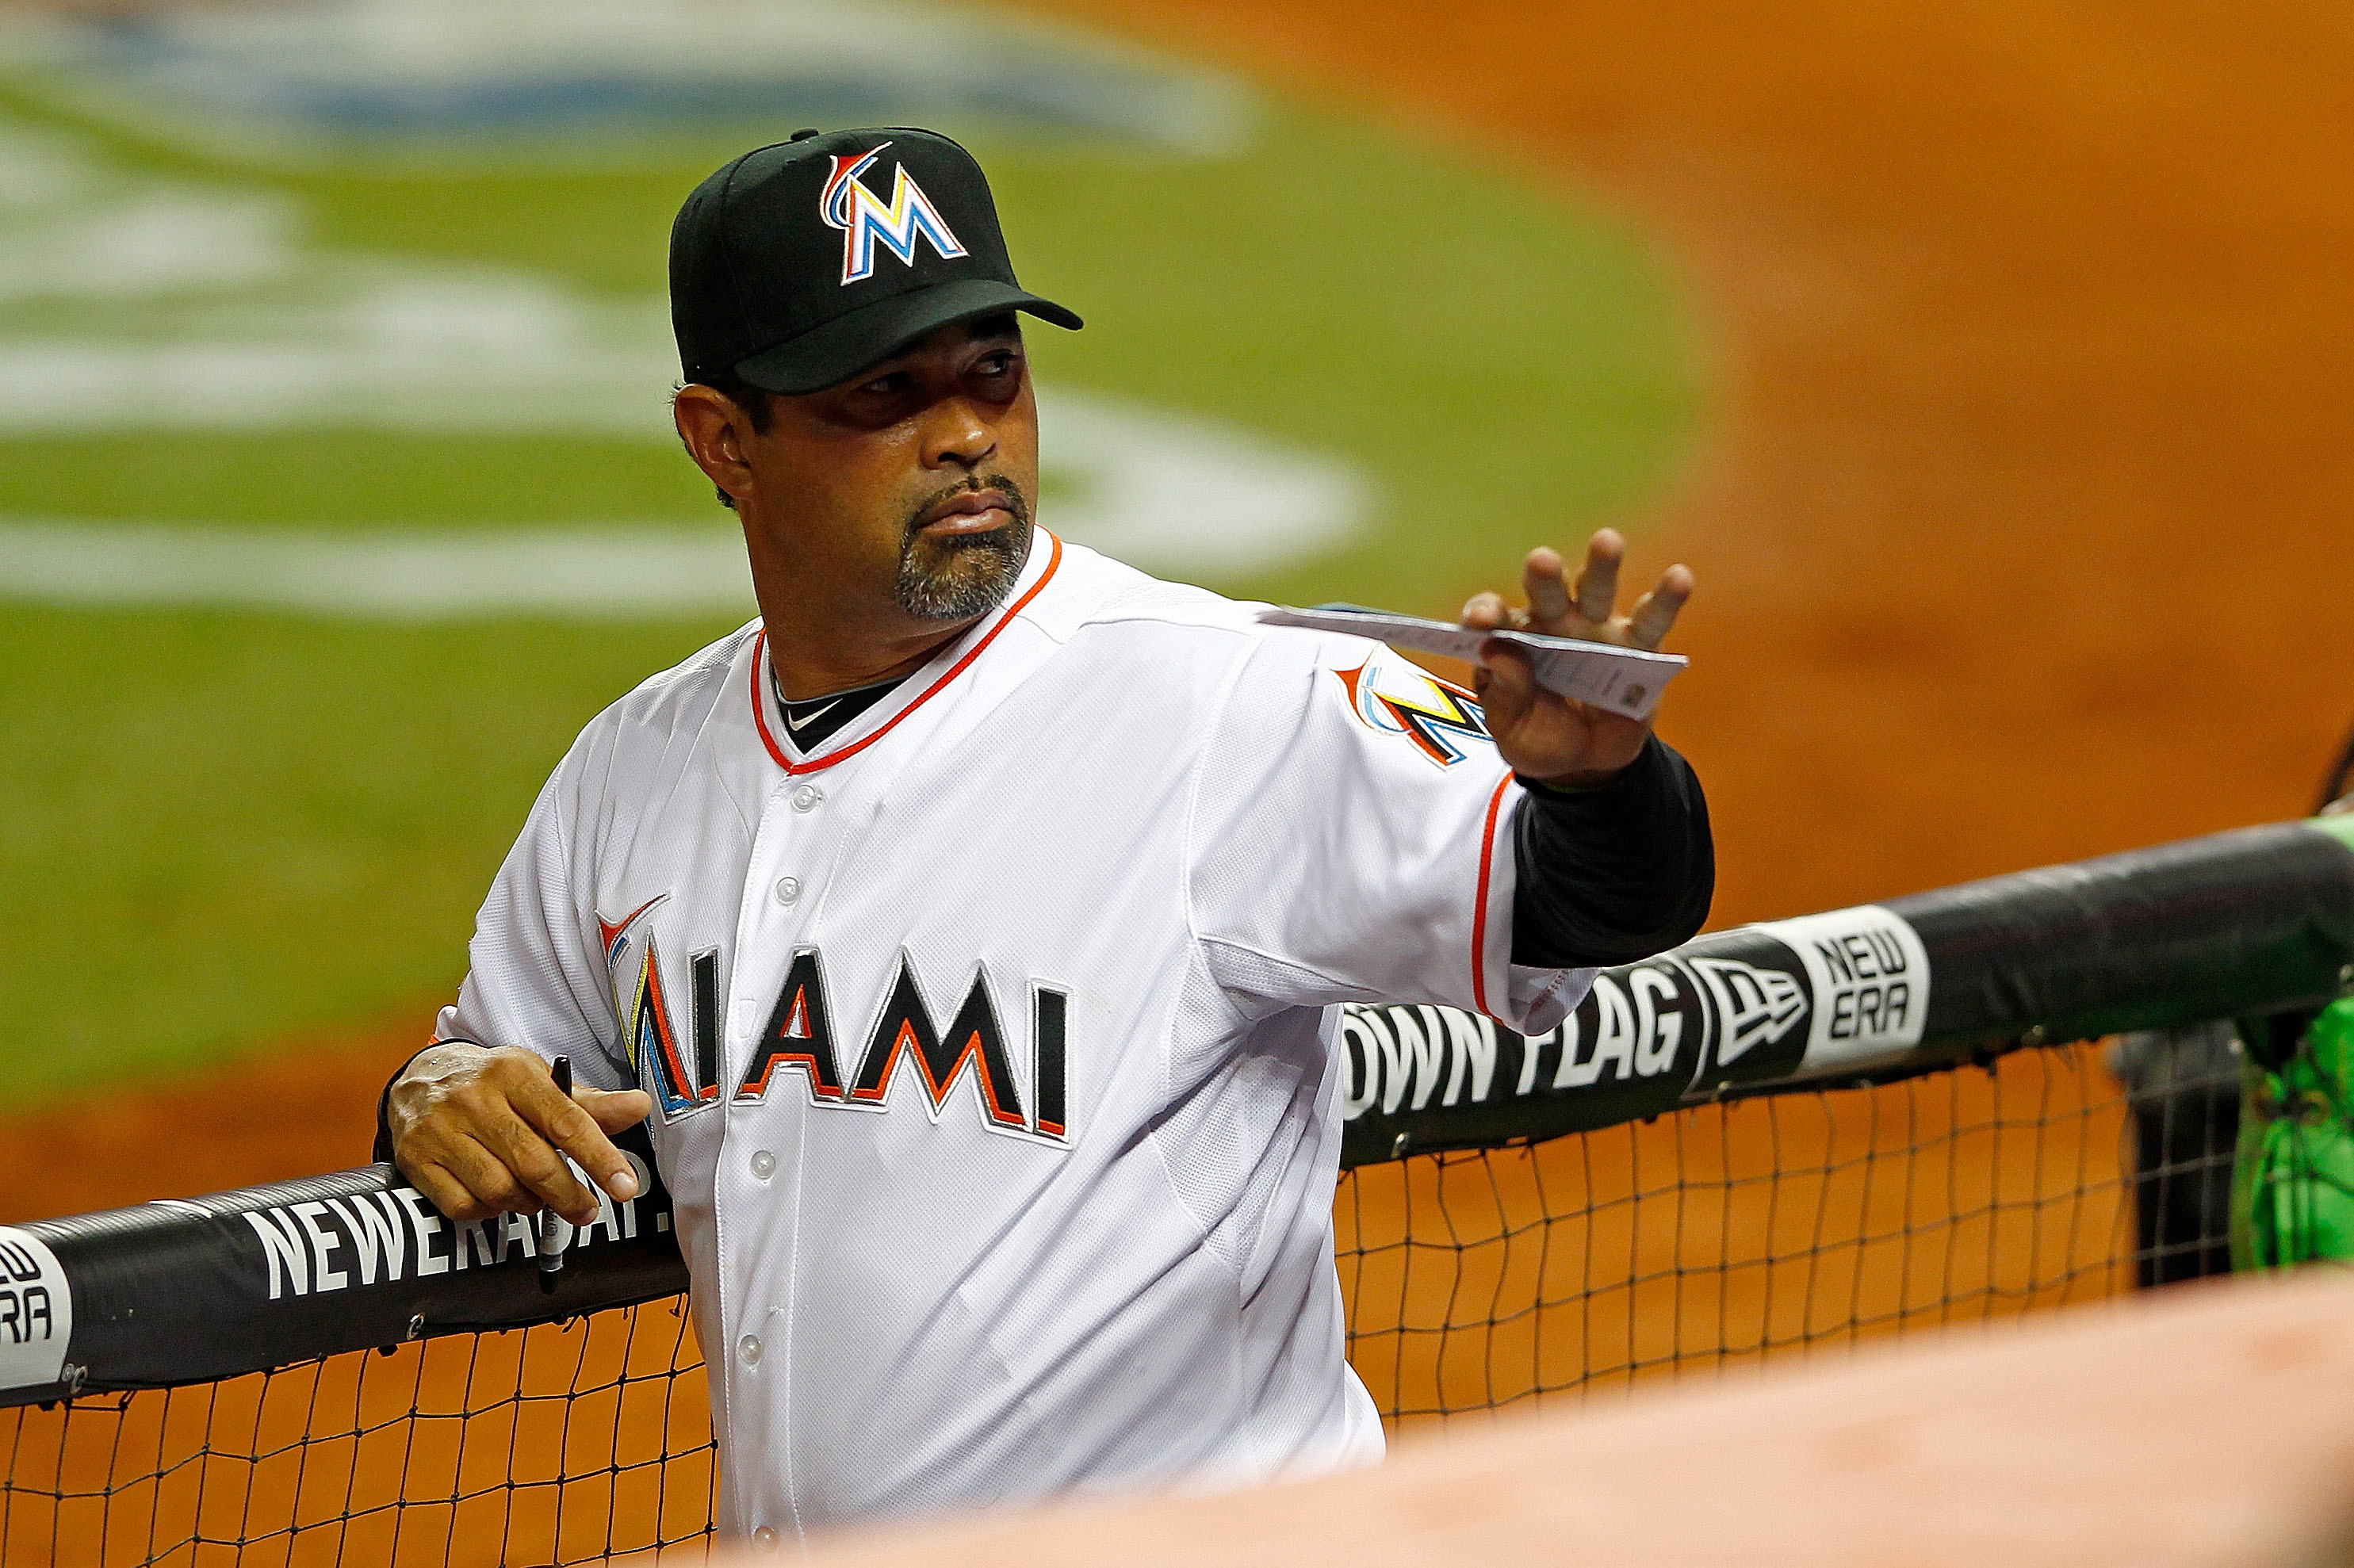 Some think Marlins manager Ozzie Guillen may thrive amid speed